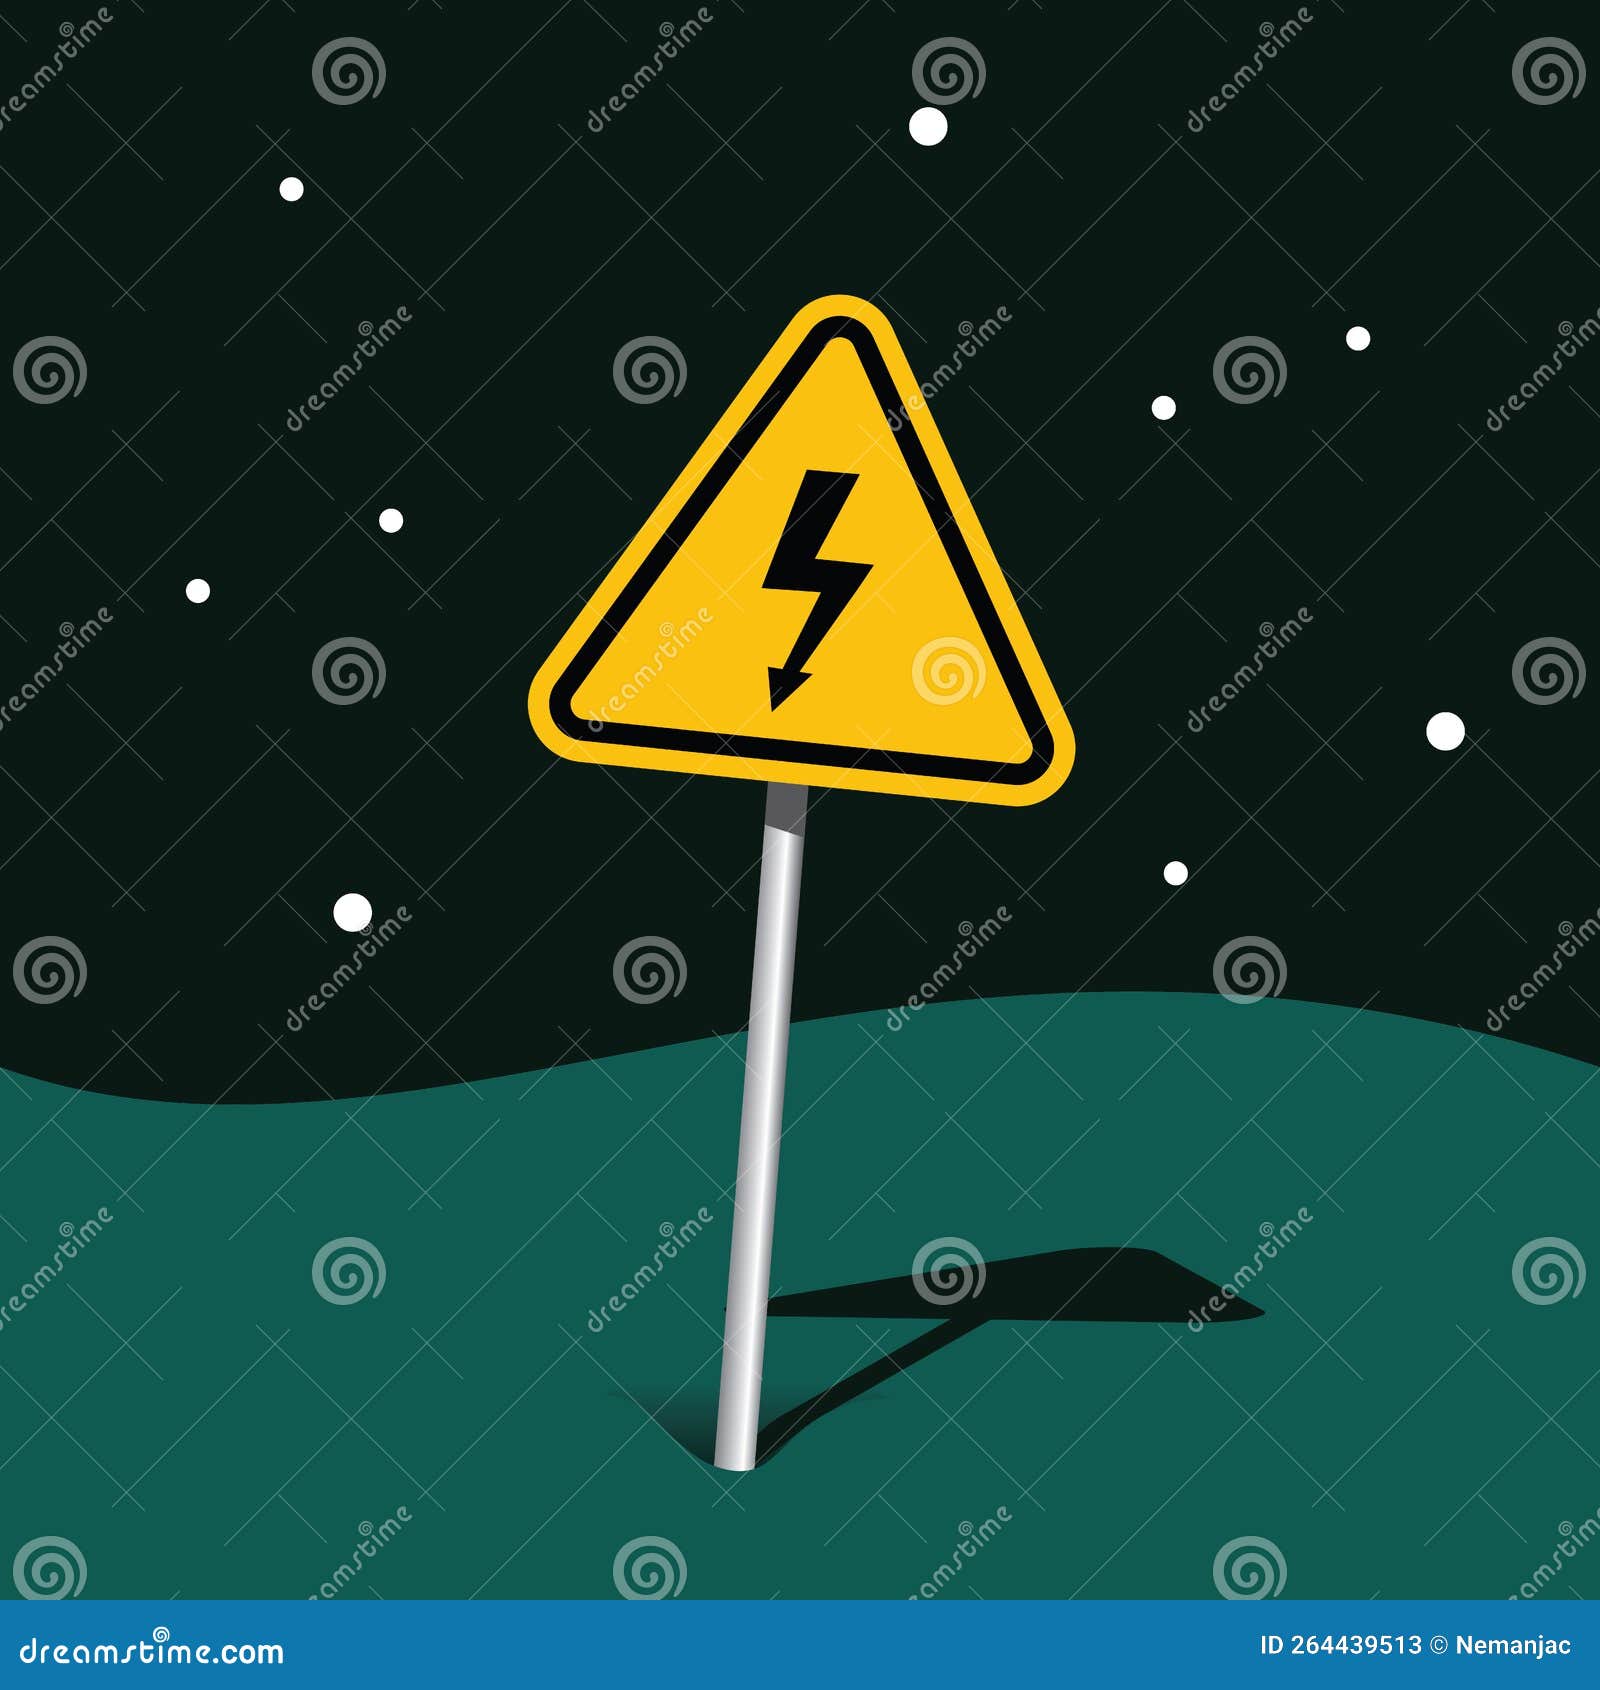 Power outage sign, vector illustration